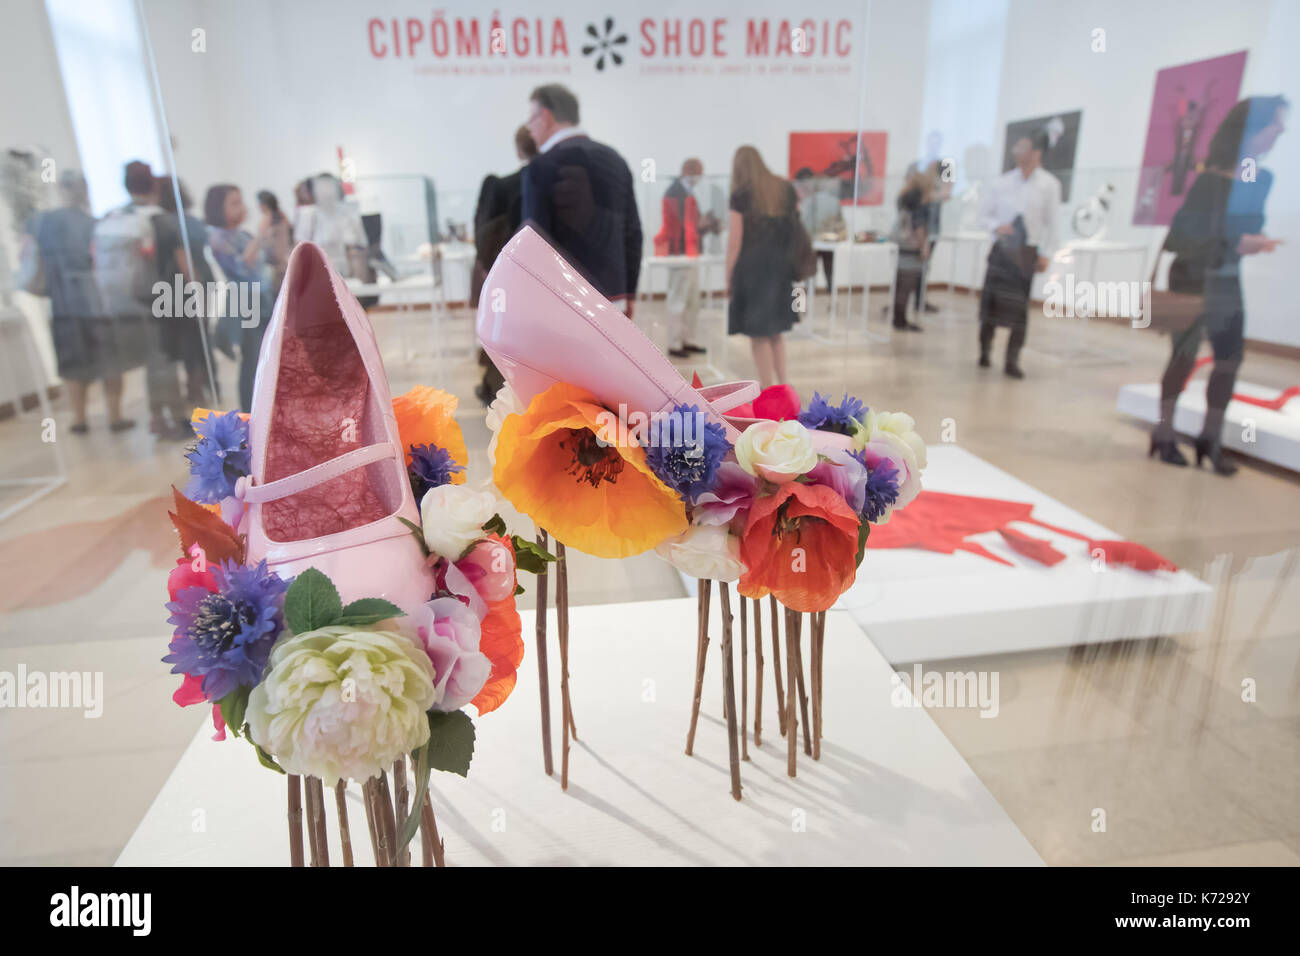 Budapest, Hungary. 14th Sep, 2017. Artwork 'Walk on a Field of Flowers' by Dutch designer Joyce de Gruiter is seen on display at the media preview of Shoe Magic experimental shoe design exhibition in Budapest, Hungary on Sept. 14, 2017. The exhibits belong to the Hague Virtual Shoe Museum. Credit: Attila Volgyi/Xinhua/Alamy Live News Stock Photo